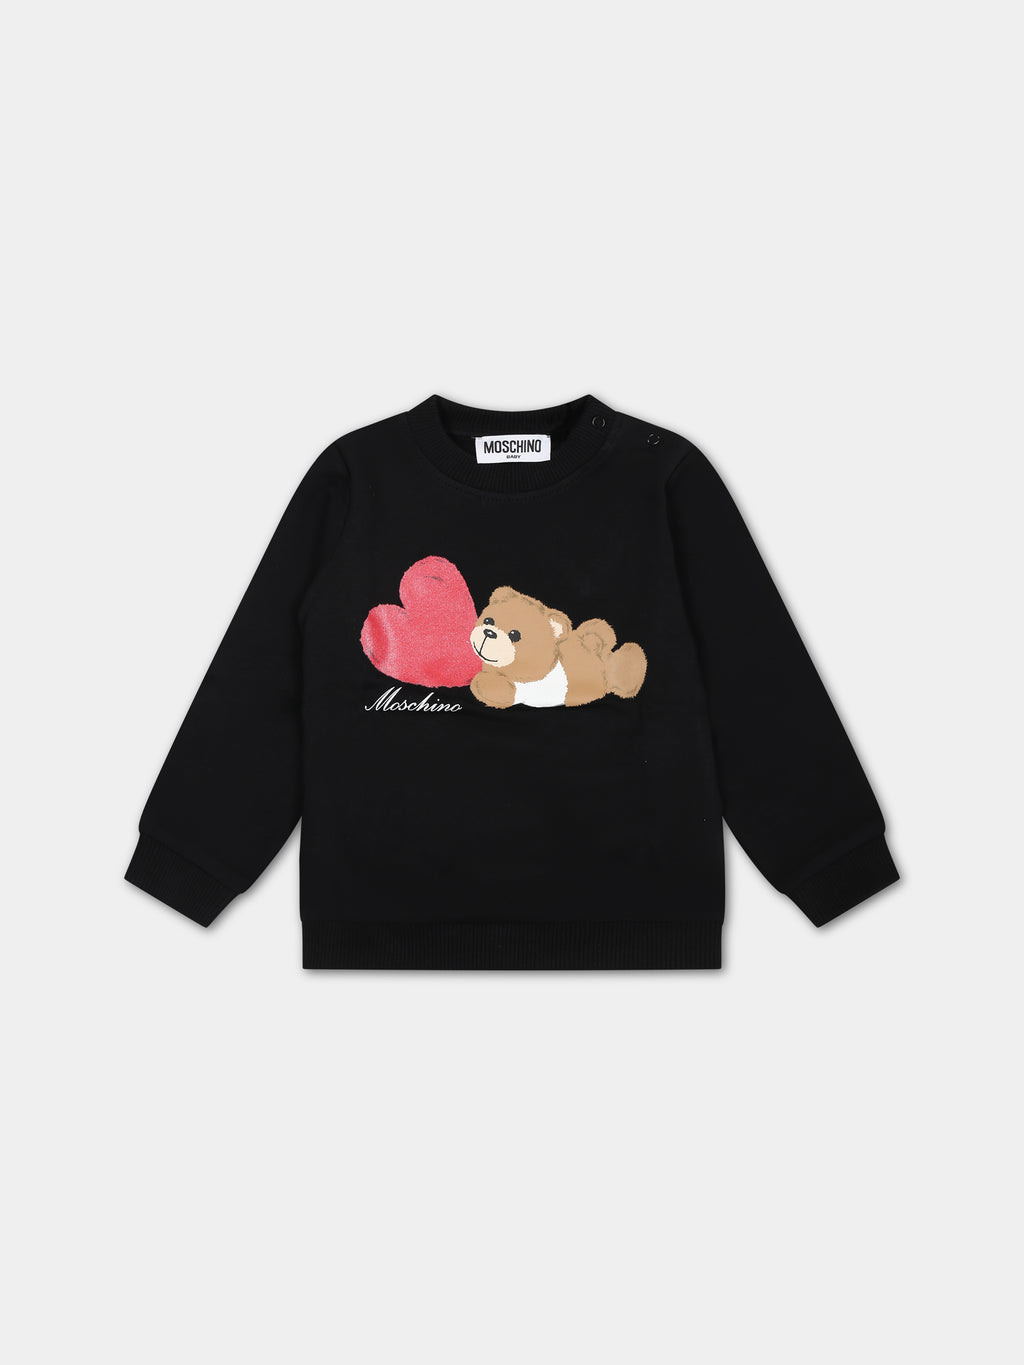 Black sweatshirt for baby girl with Teddy Bear and heart